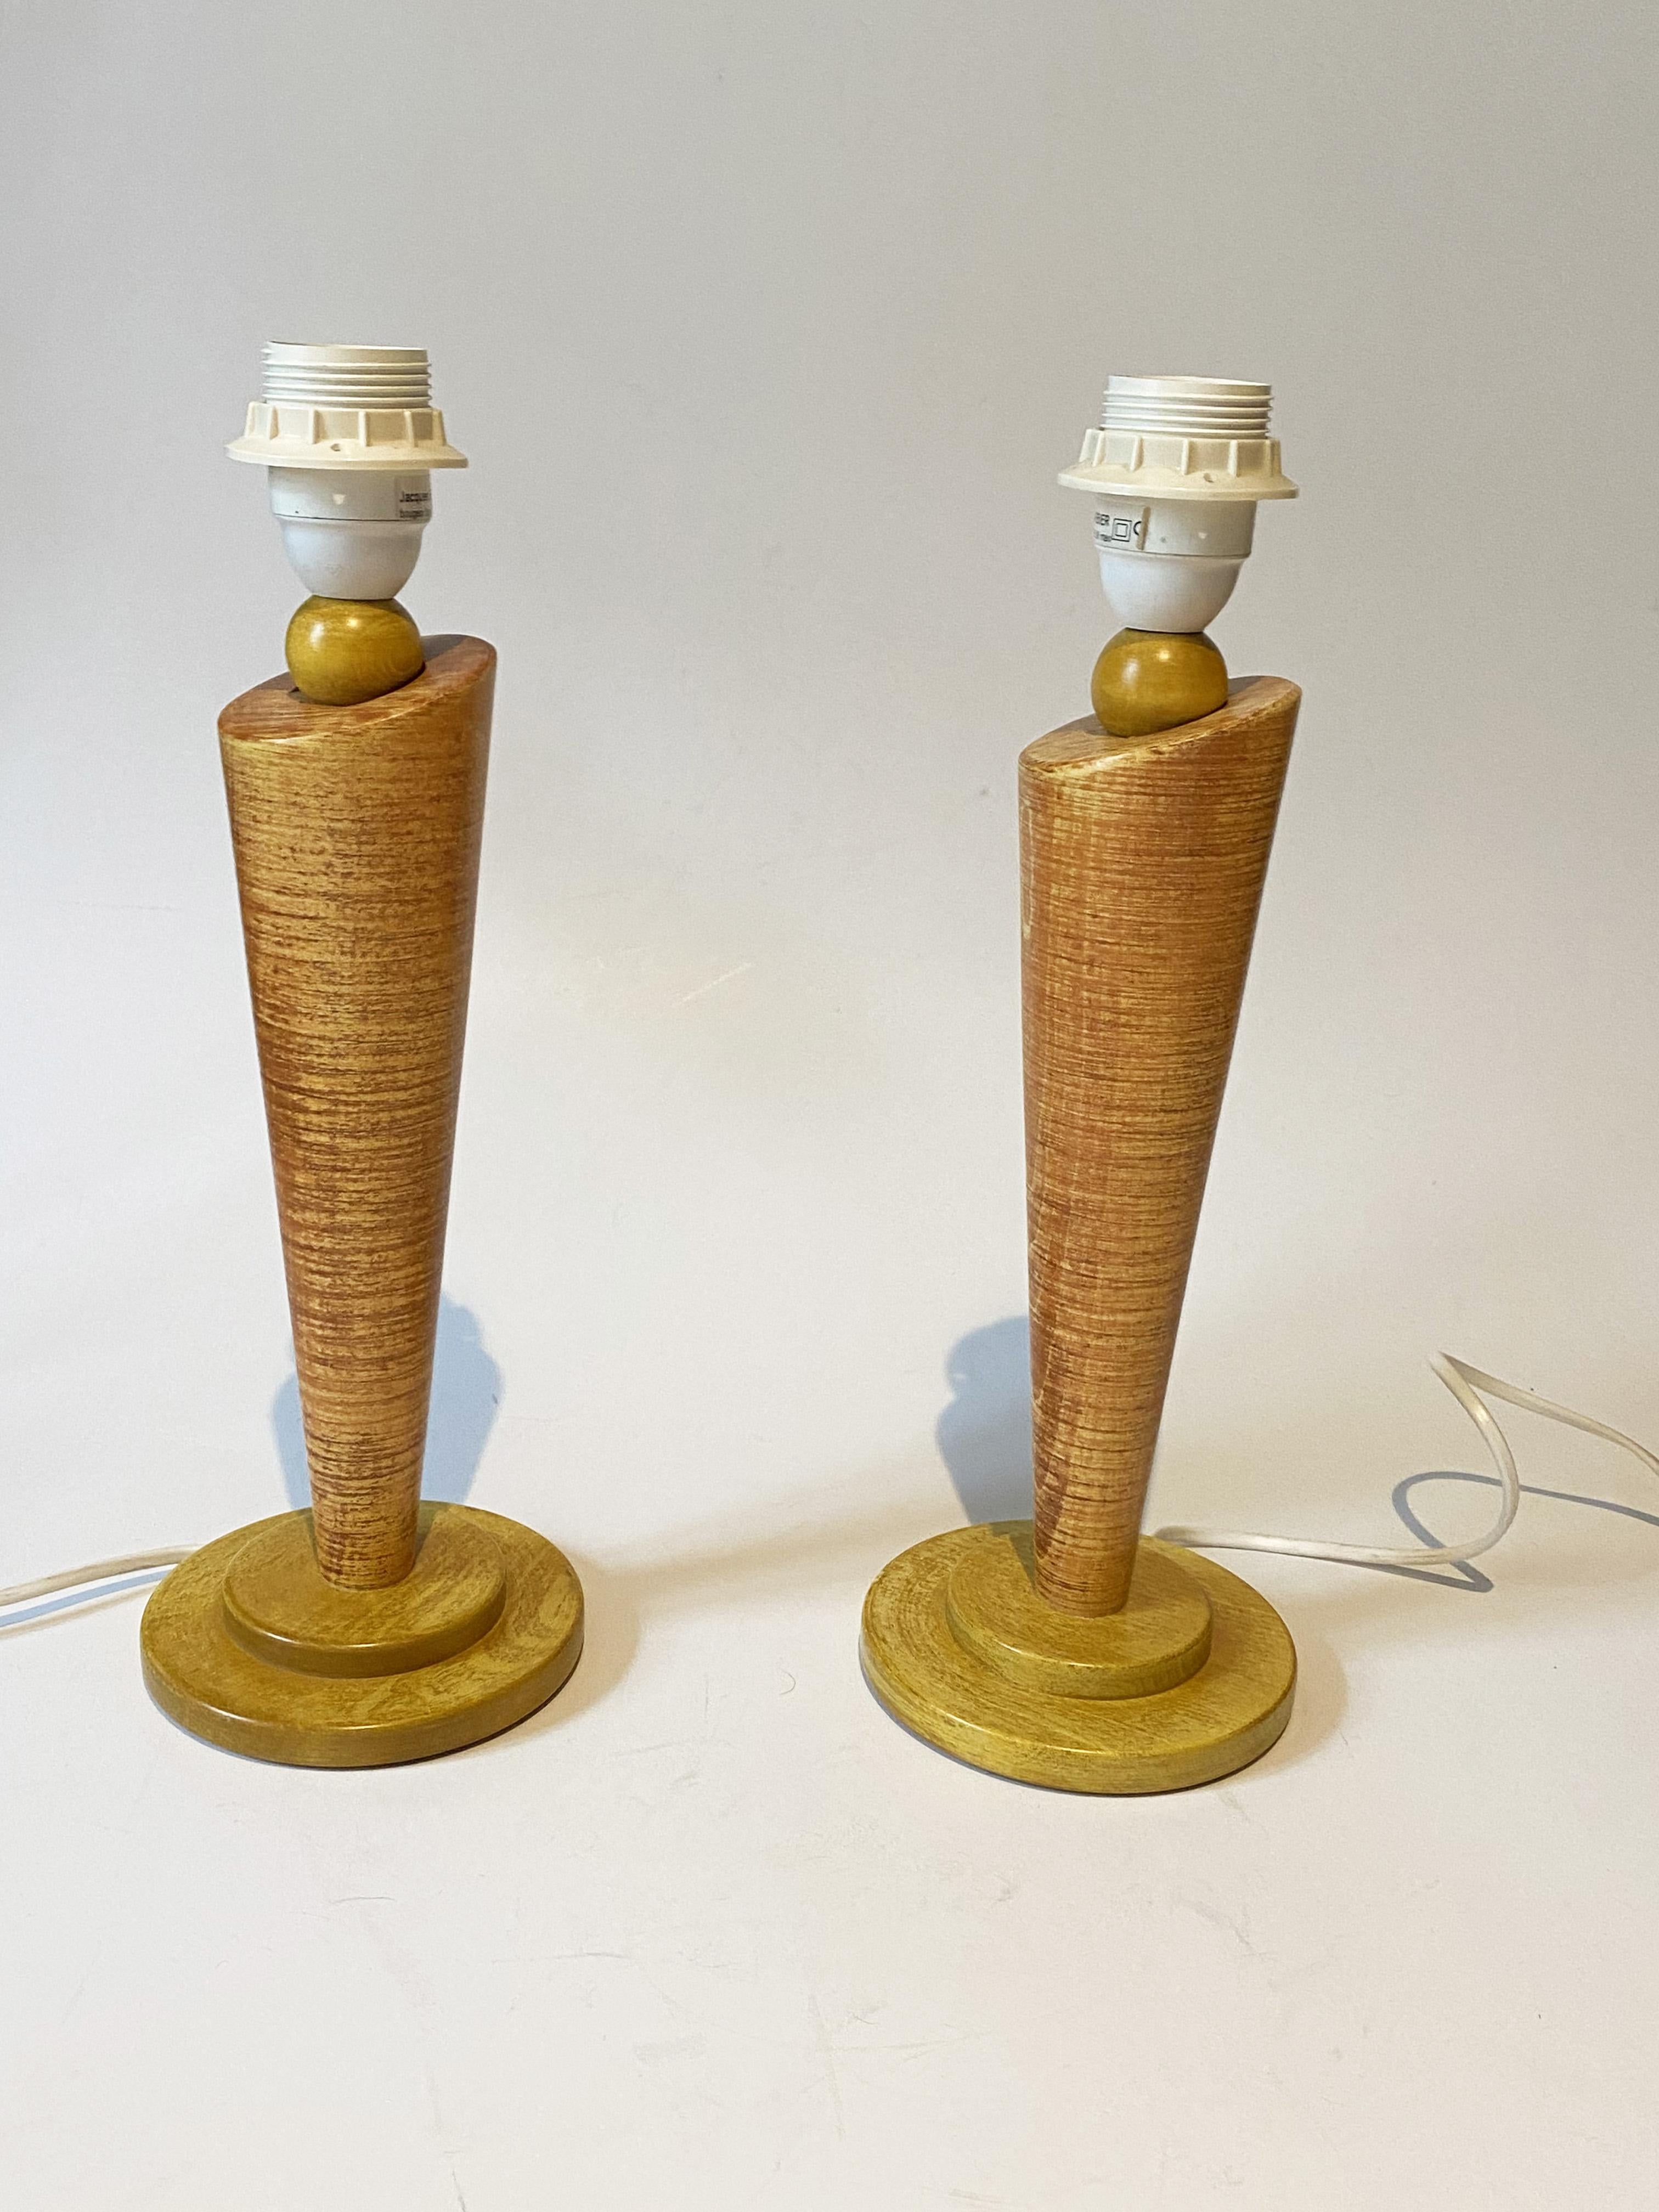 Late 20th Century Postmodern Lamps in Wood, style of Memphis Milano or Olivier Villatte, 1980s. For Sale